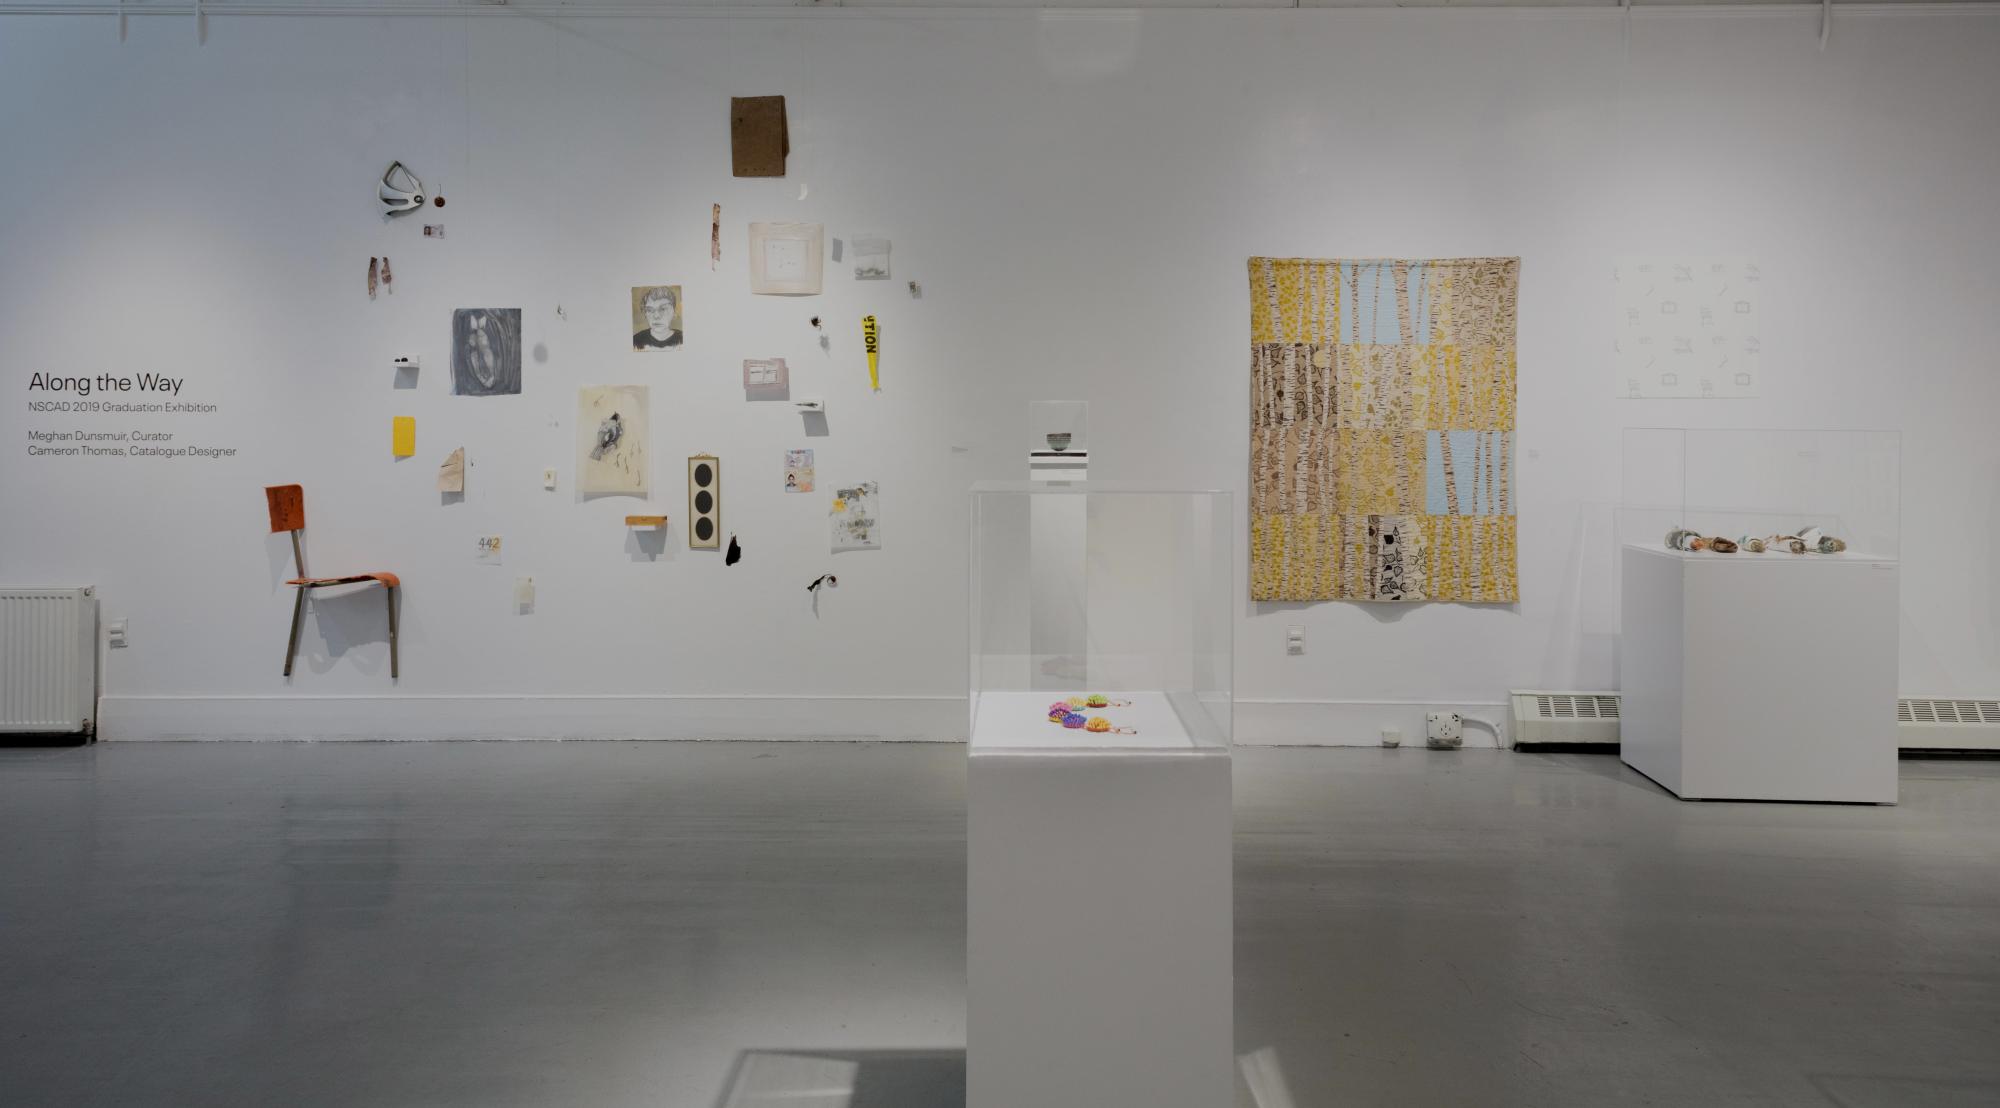 2019 Graduation exhibition installation. Small drawings and found objects are on the wall next to a textile hanging.